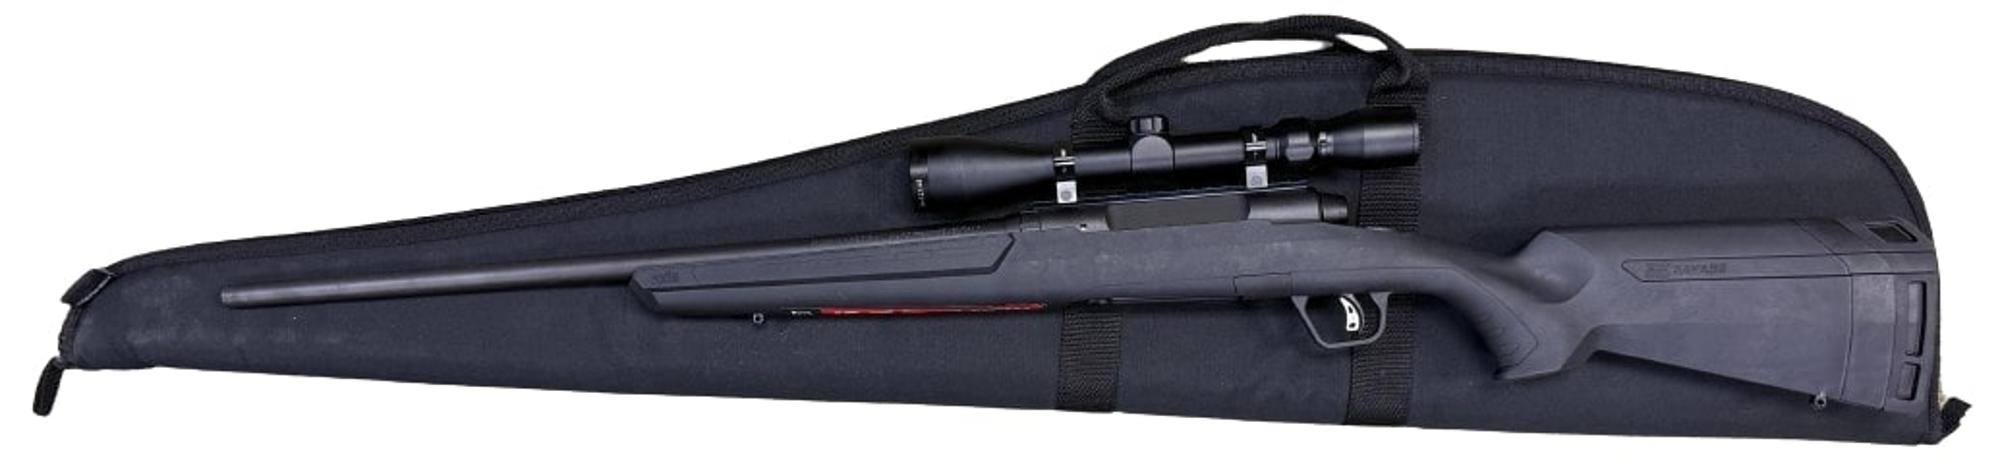 Savage Axis II XP .308 Win With 4-12x40 TruGlo Scope  Case57370-COMBO-D23  | 308 WINCHESTER | 57370-COMBO-D23 | 10504679